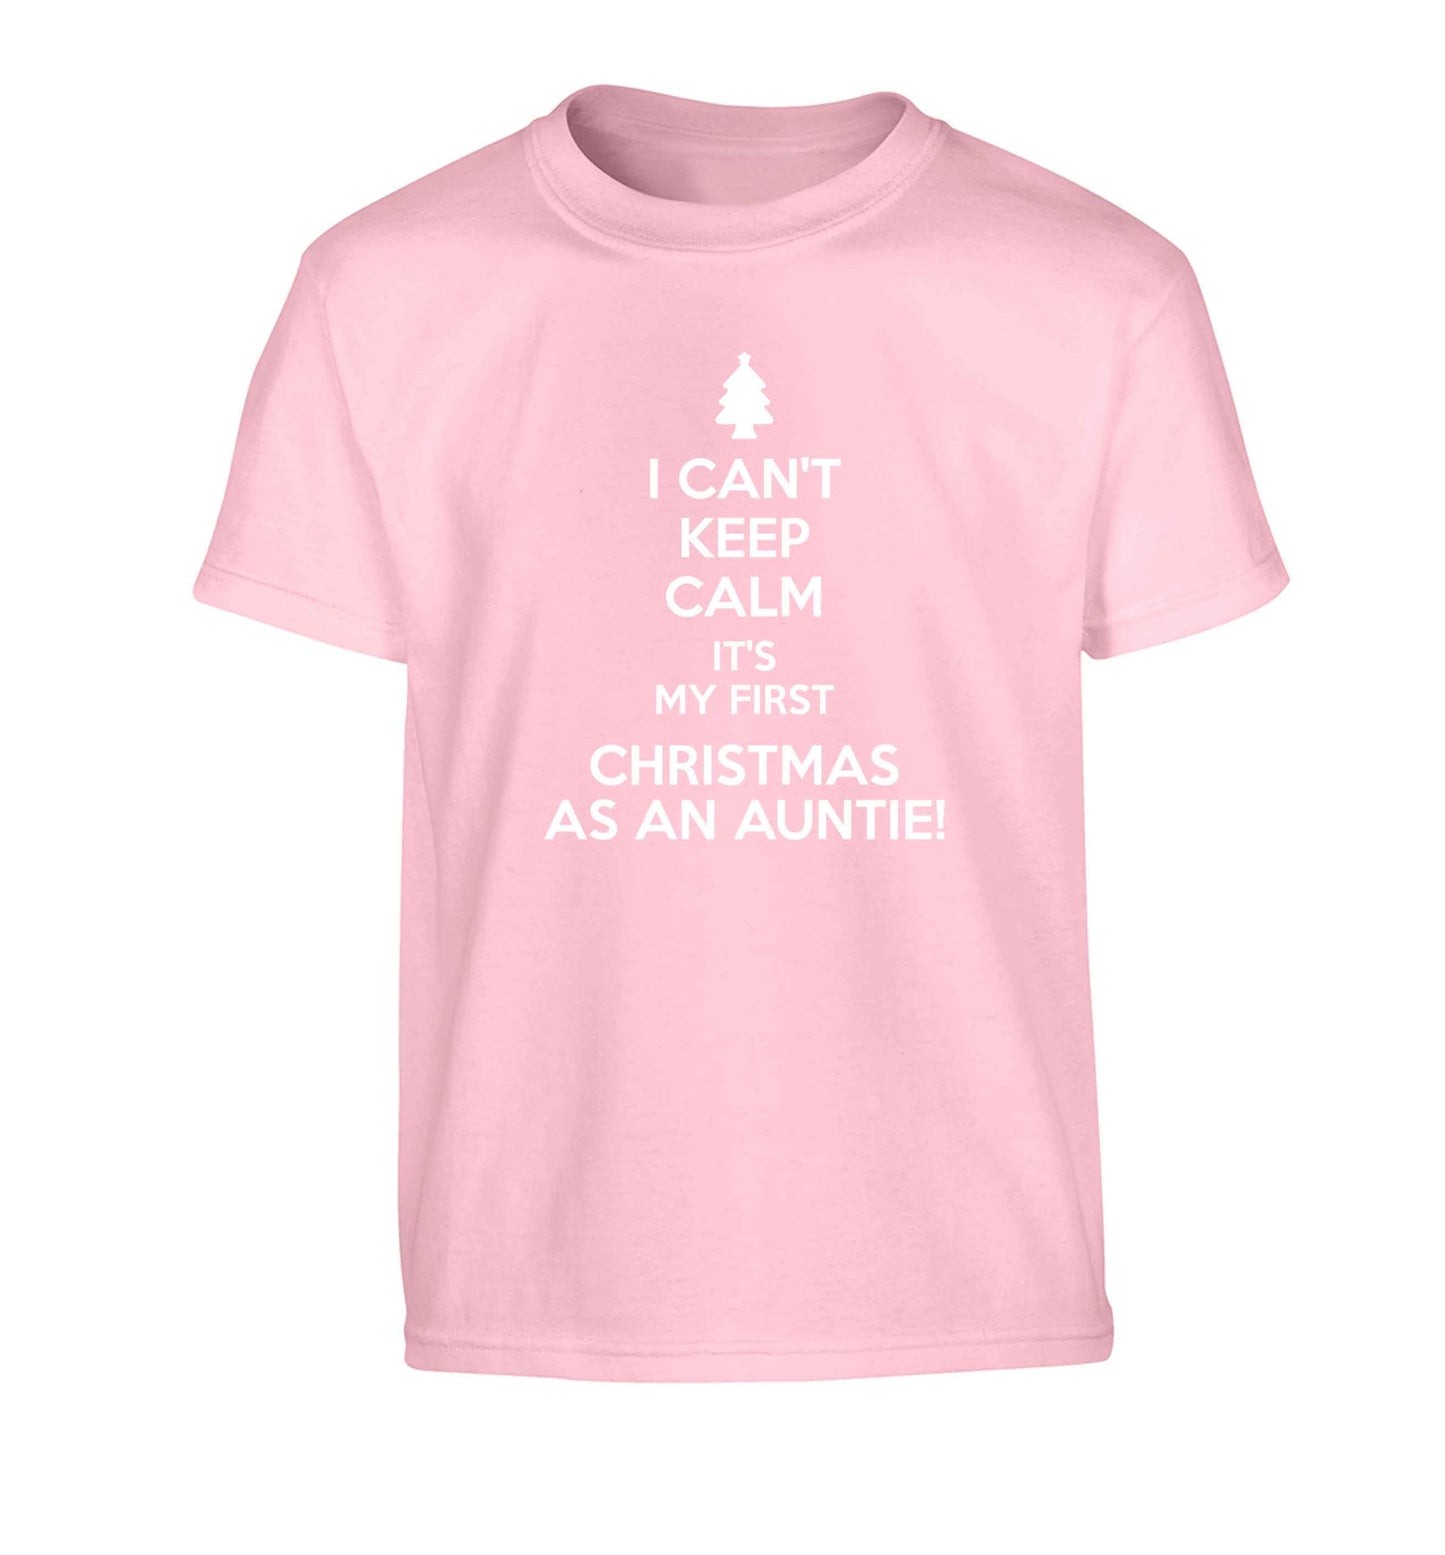 I can't keep calm it's my first Christmas as an auntie! Children's light pink Tshirt 12-13 Years